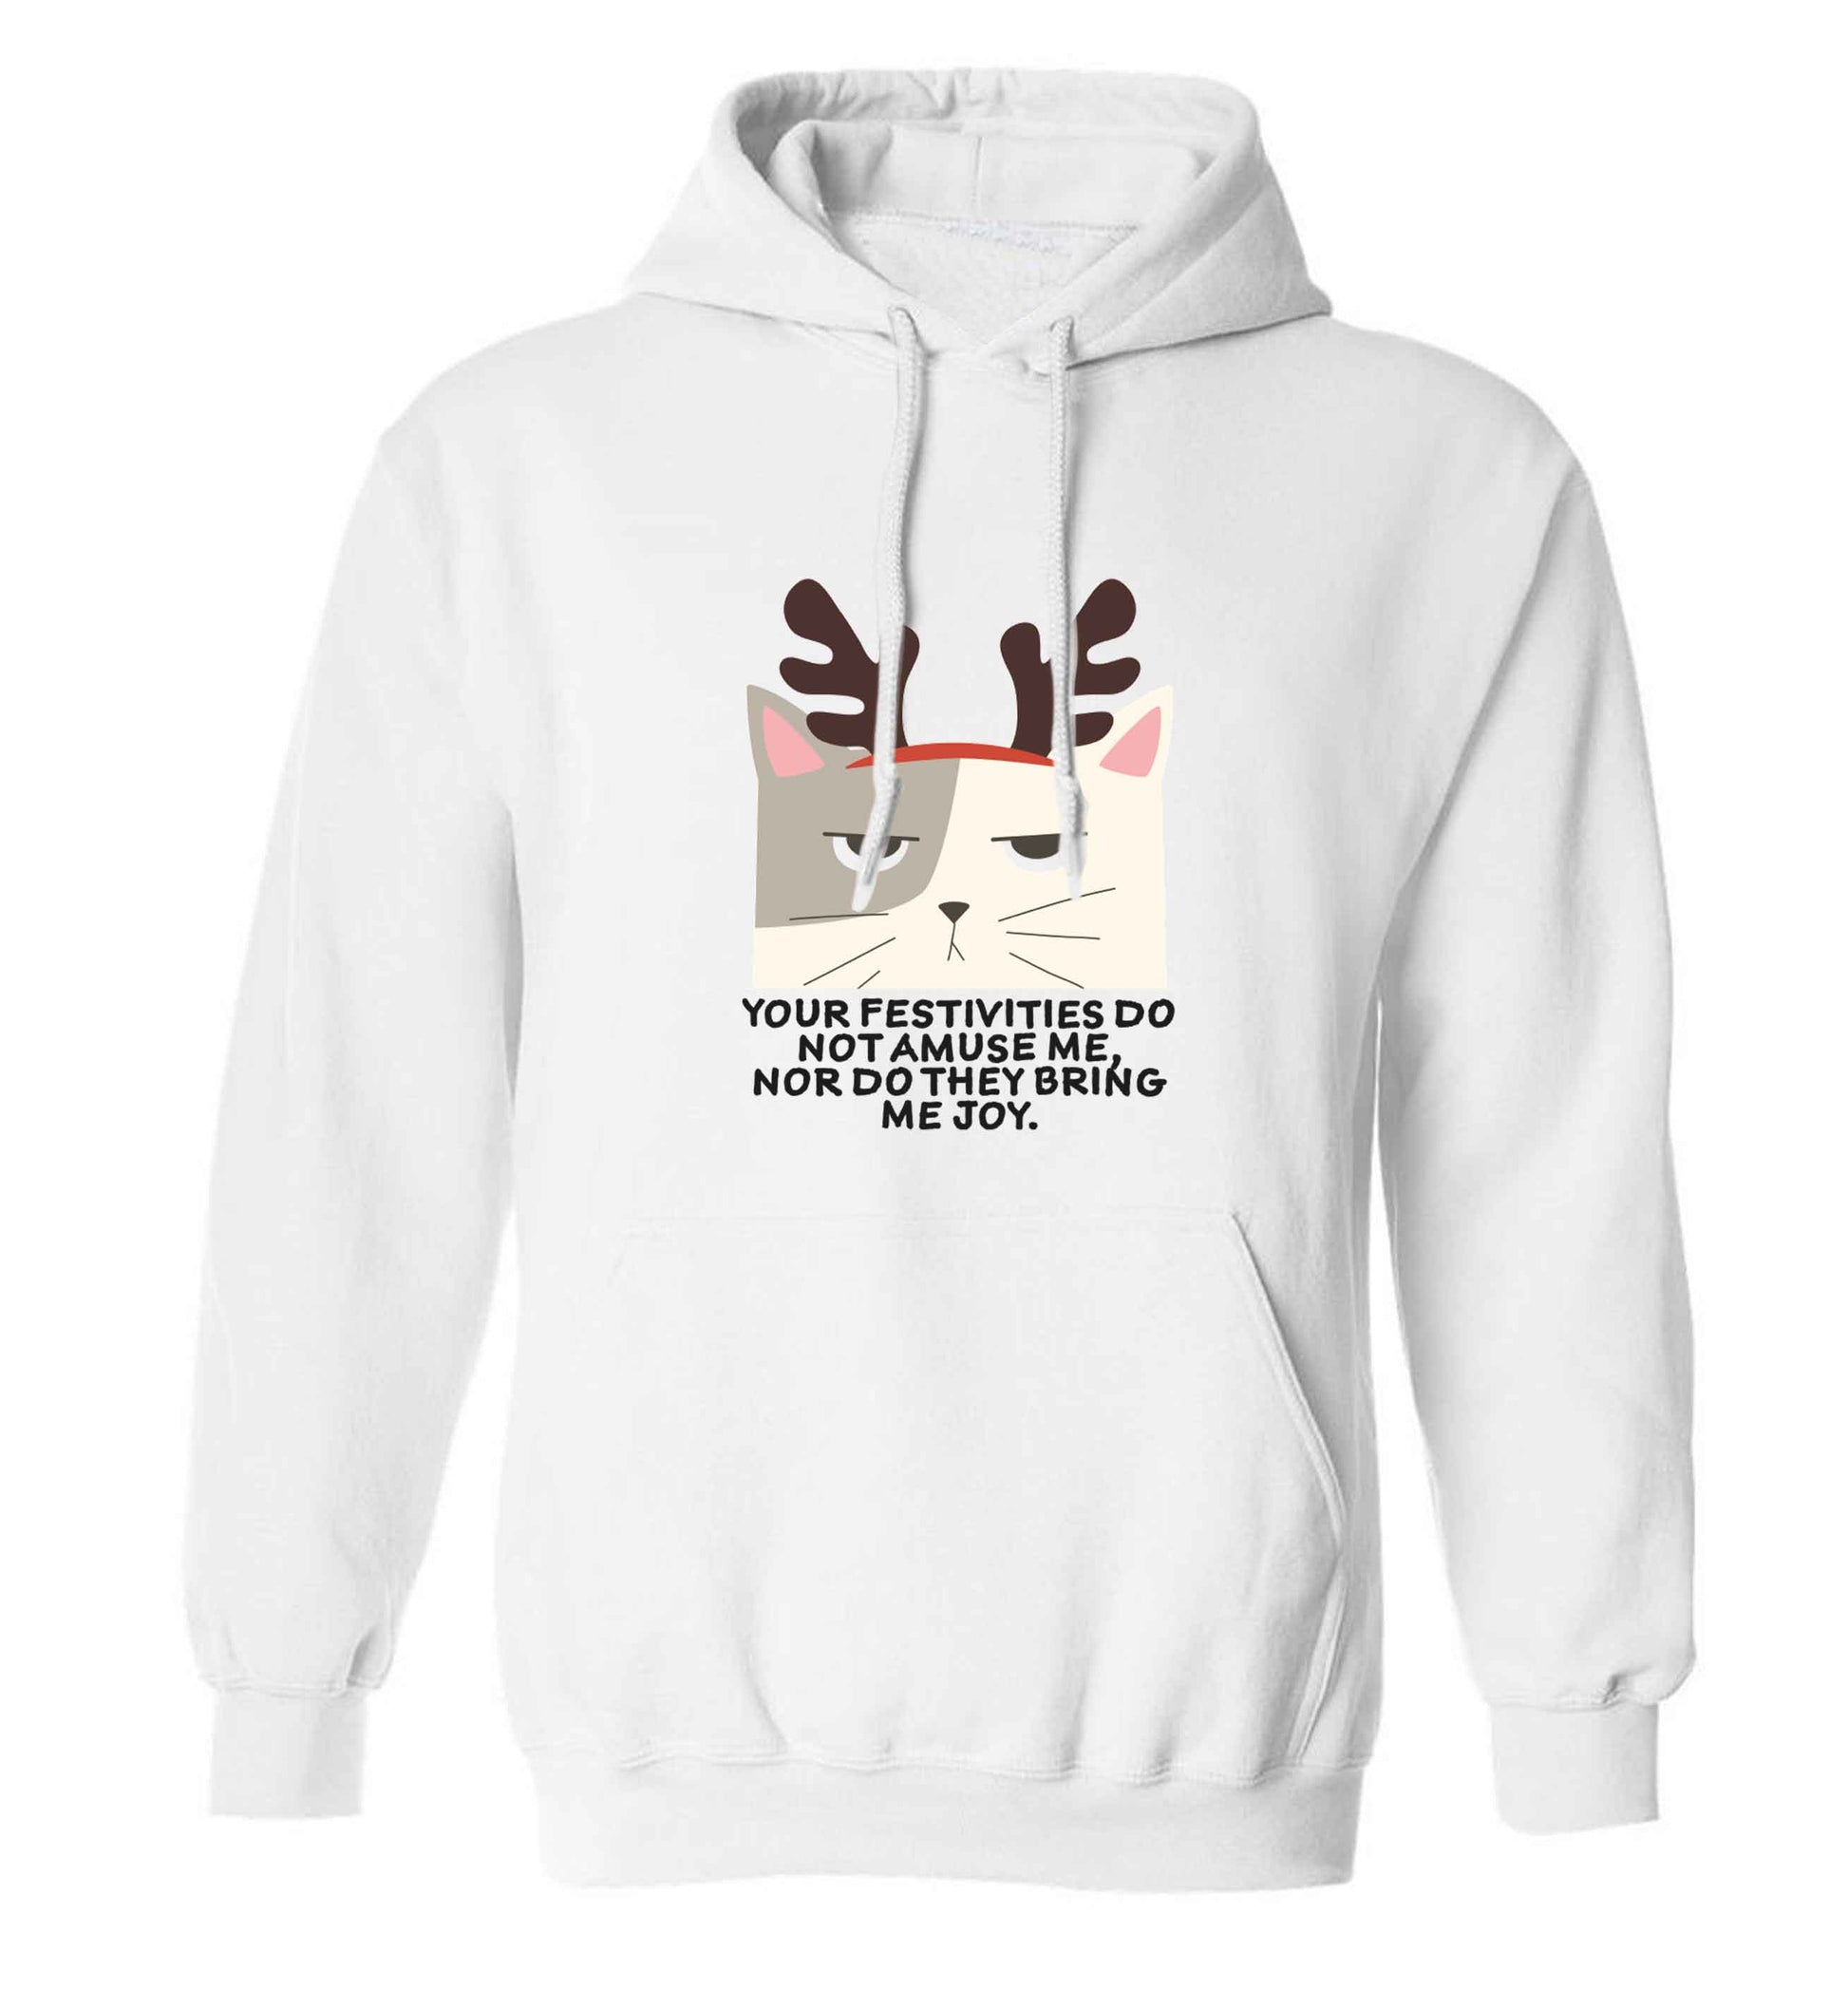 Your festivities do not amuse me nor do they bring me joy adults unisex white hoodie 2XL